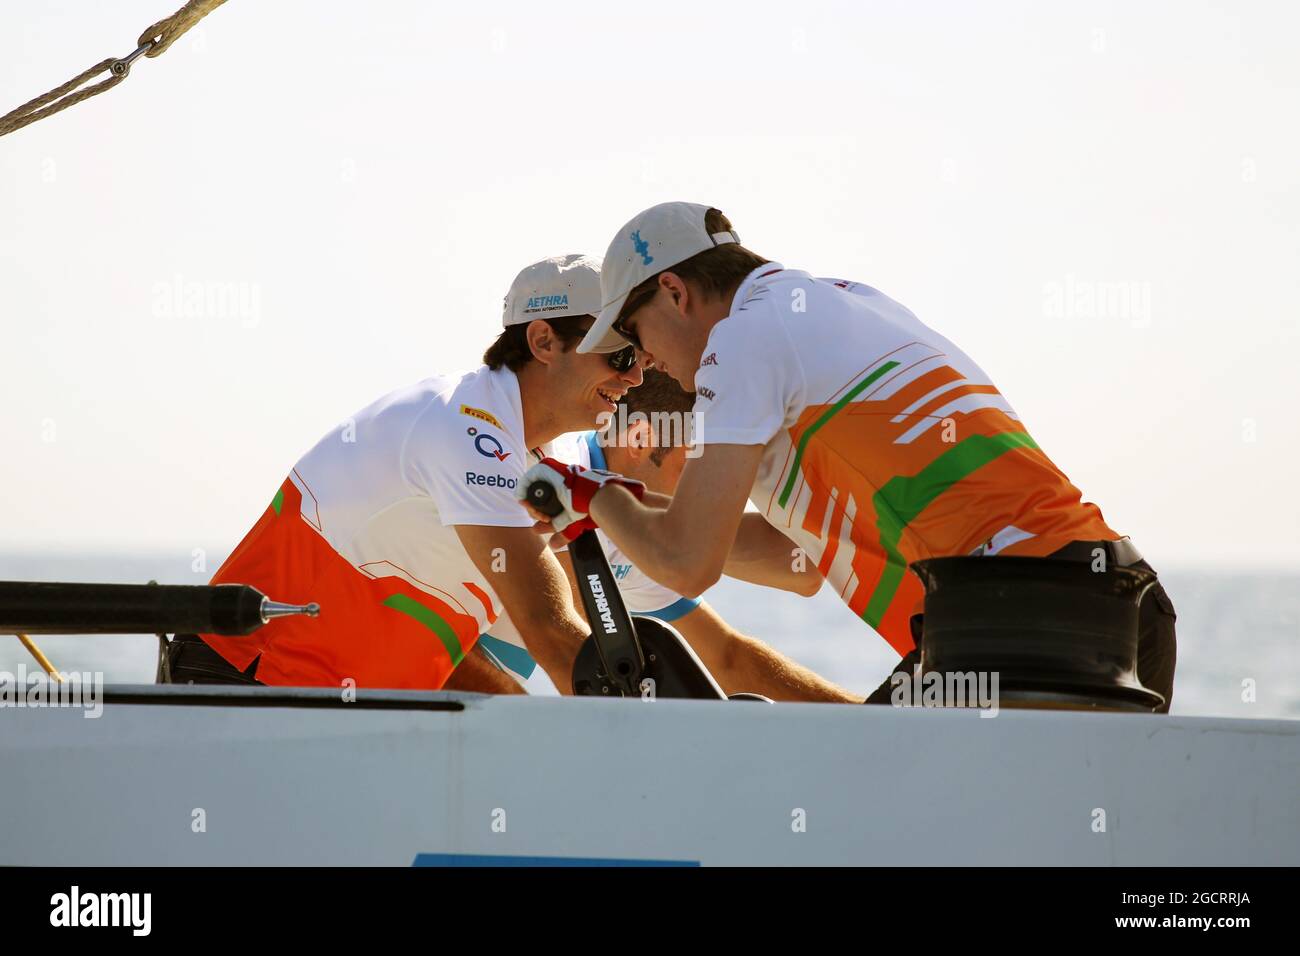 Nico Hulkenberg (GER) Sahara Force India F1 (Right) and Jules Bianchi (FRA) Sahara Force India F1 Team Third Driver on the Aethra America's Cup Boat. European Grand Prix, Thursday 21st June 2012. Valencia, Spain. Stock Photo